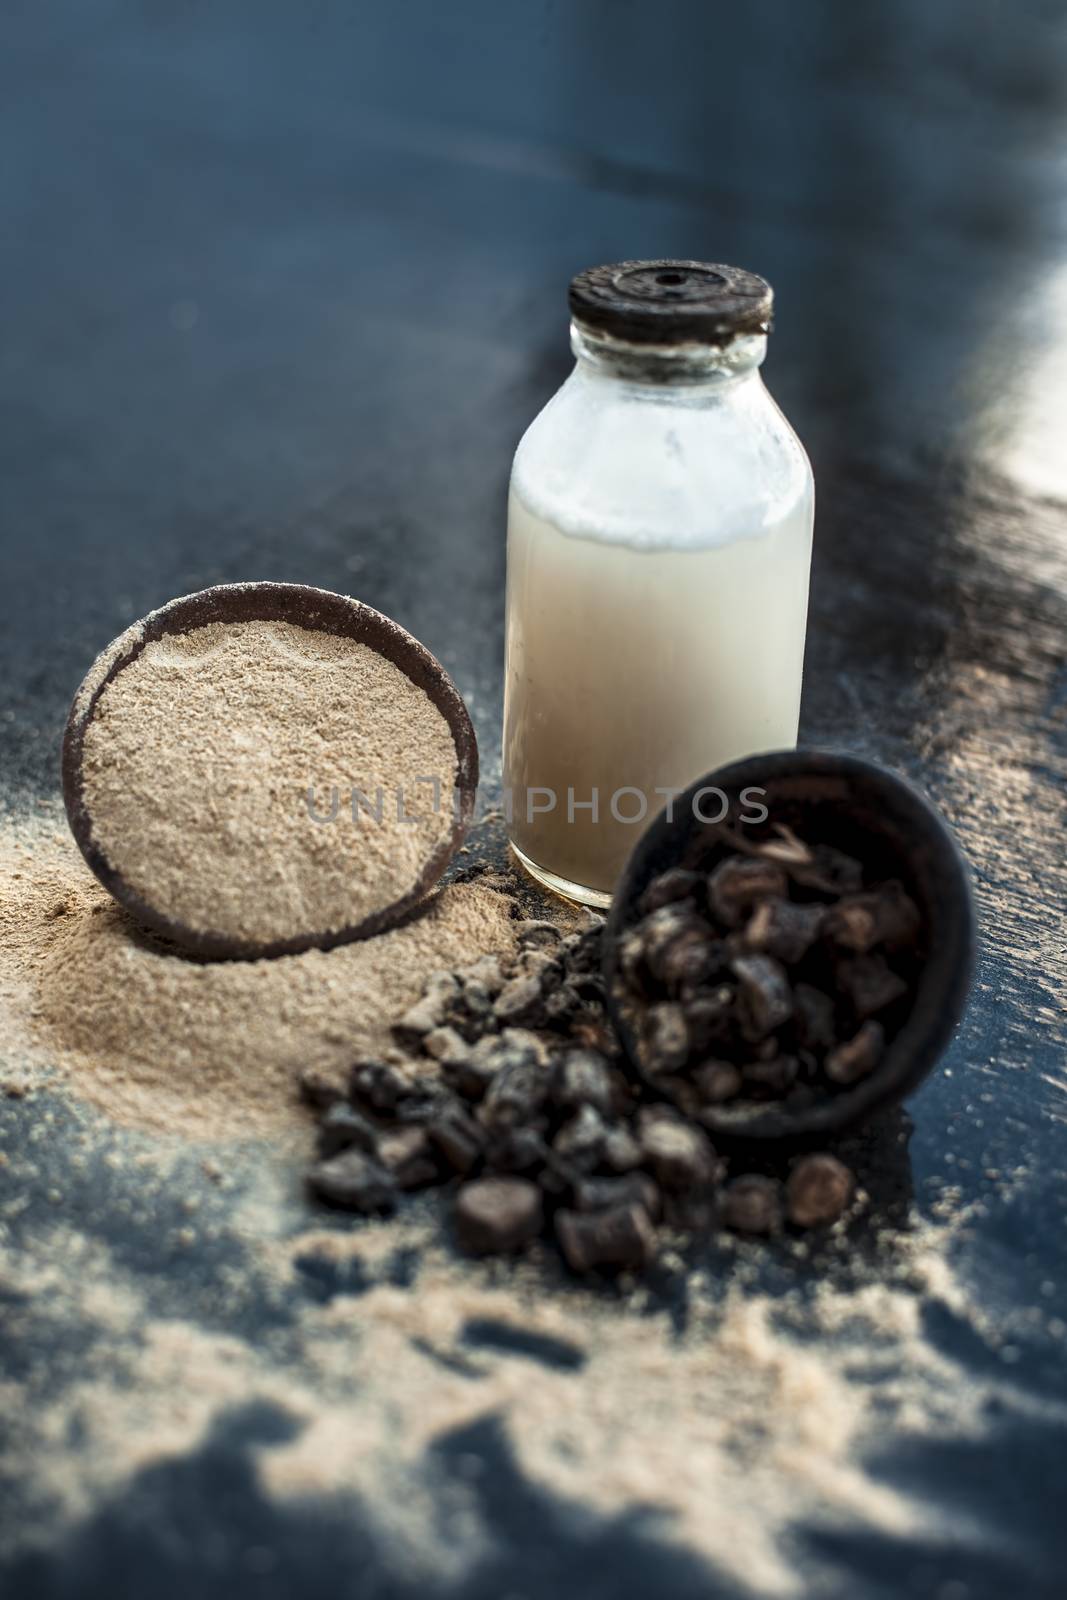 Popular Indian &amp; Asian ayurvedic organic herb musli or Chlorophytum borivilianum or Curculigo orchioides or kali moosli in a clay on wooden surface with a transparent glass bottle filled with milk.